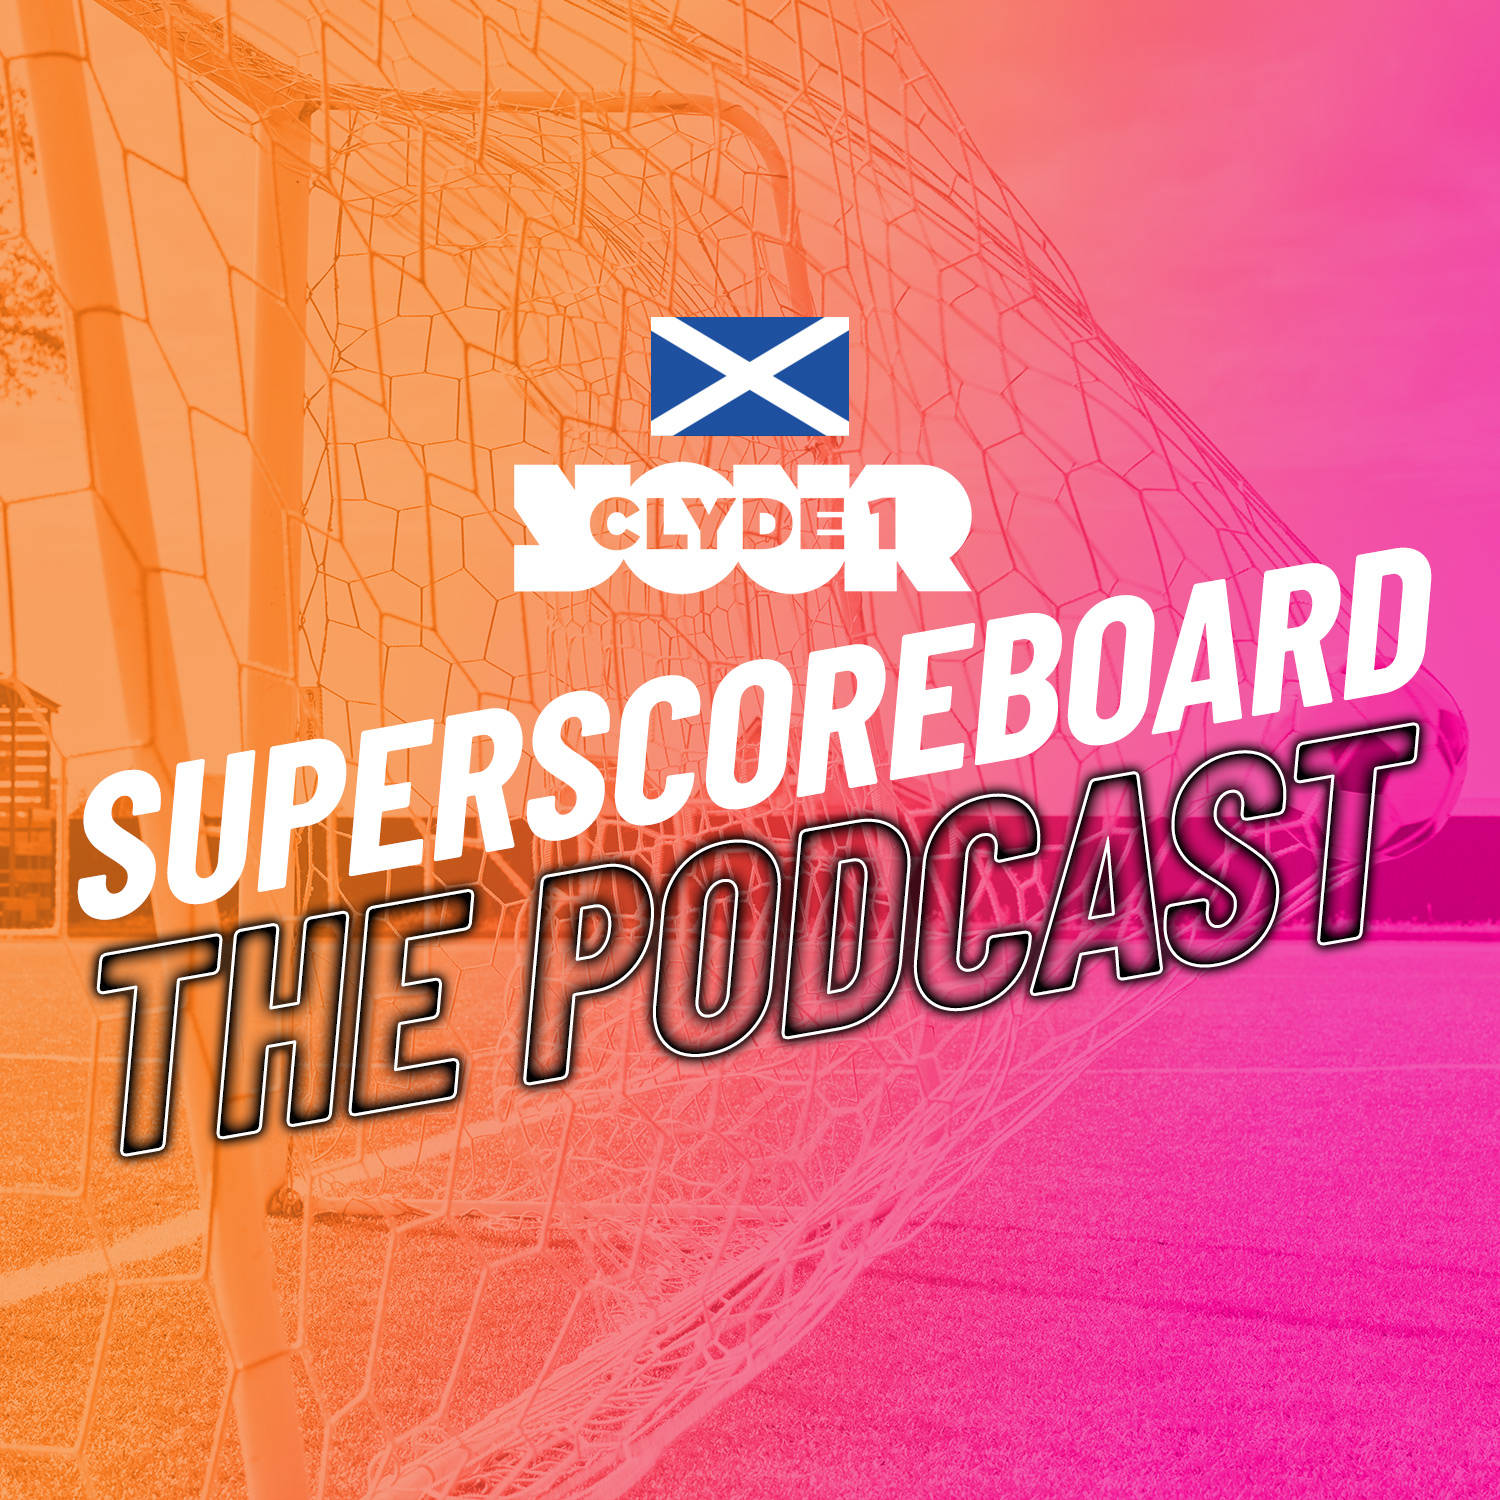 Saturday 16th March Clyde 1 Superscoreboard Part 2